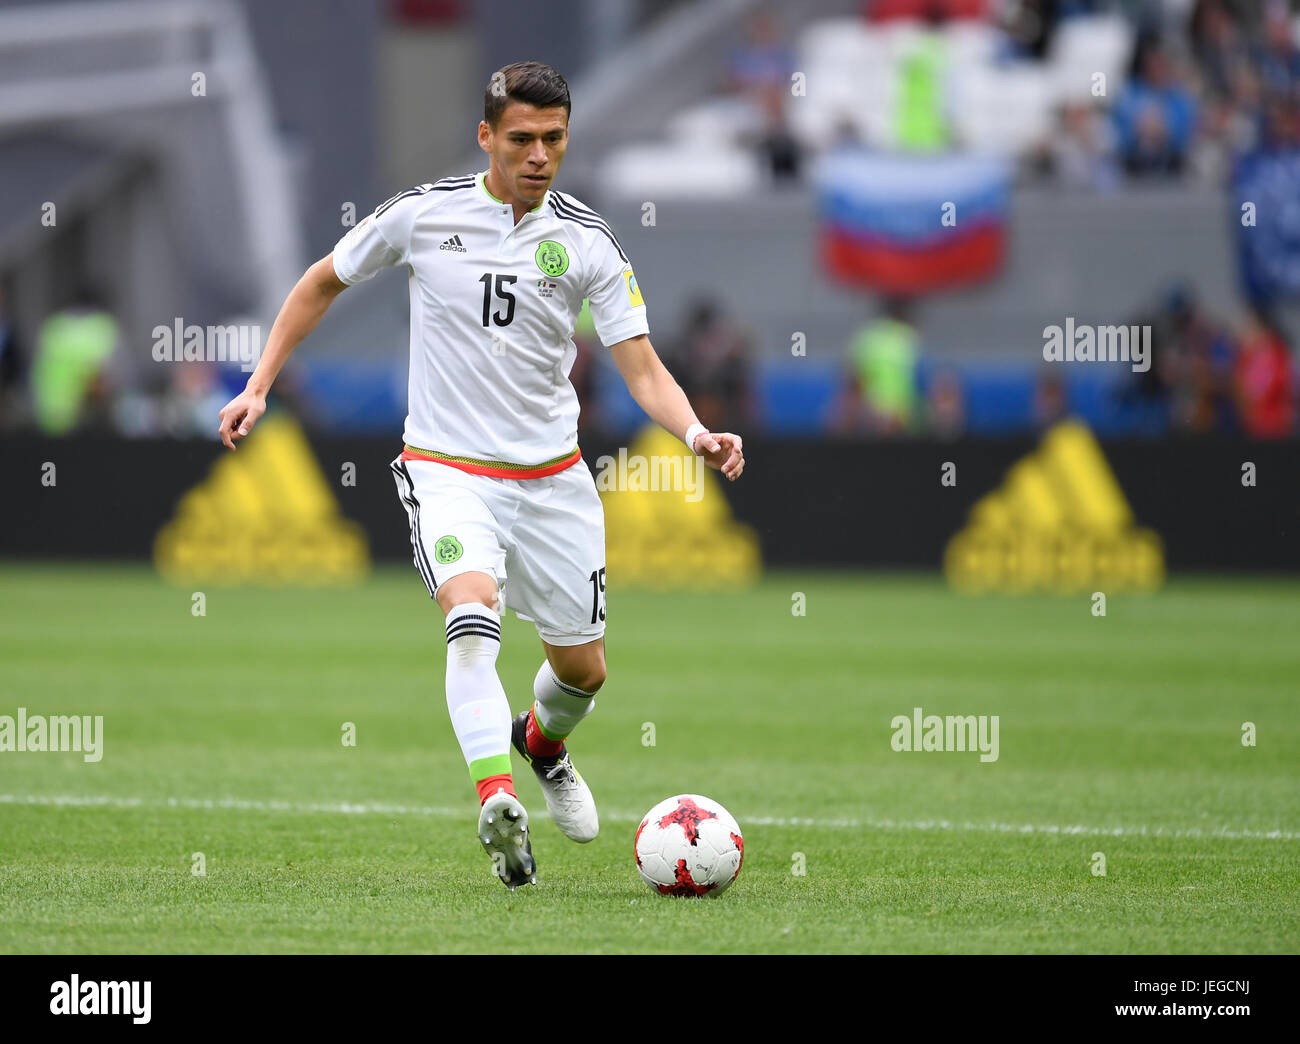 Kazan, Russia. 24th June, 2017. Mexico's Hector Moreno in action during the group stage match pitting Mexico against Russia at the Kazan Arena in Kazan, Russia, 24 June 2017. Photo: Marius Becker/dpa/Alamy Live News Stock Photo